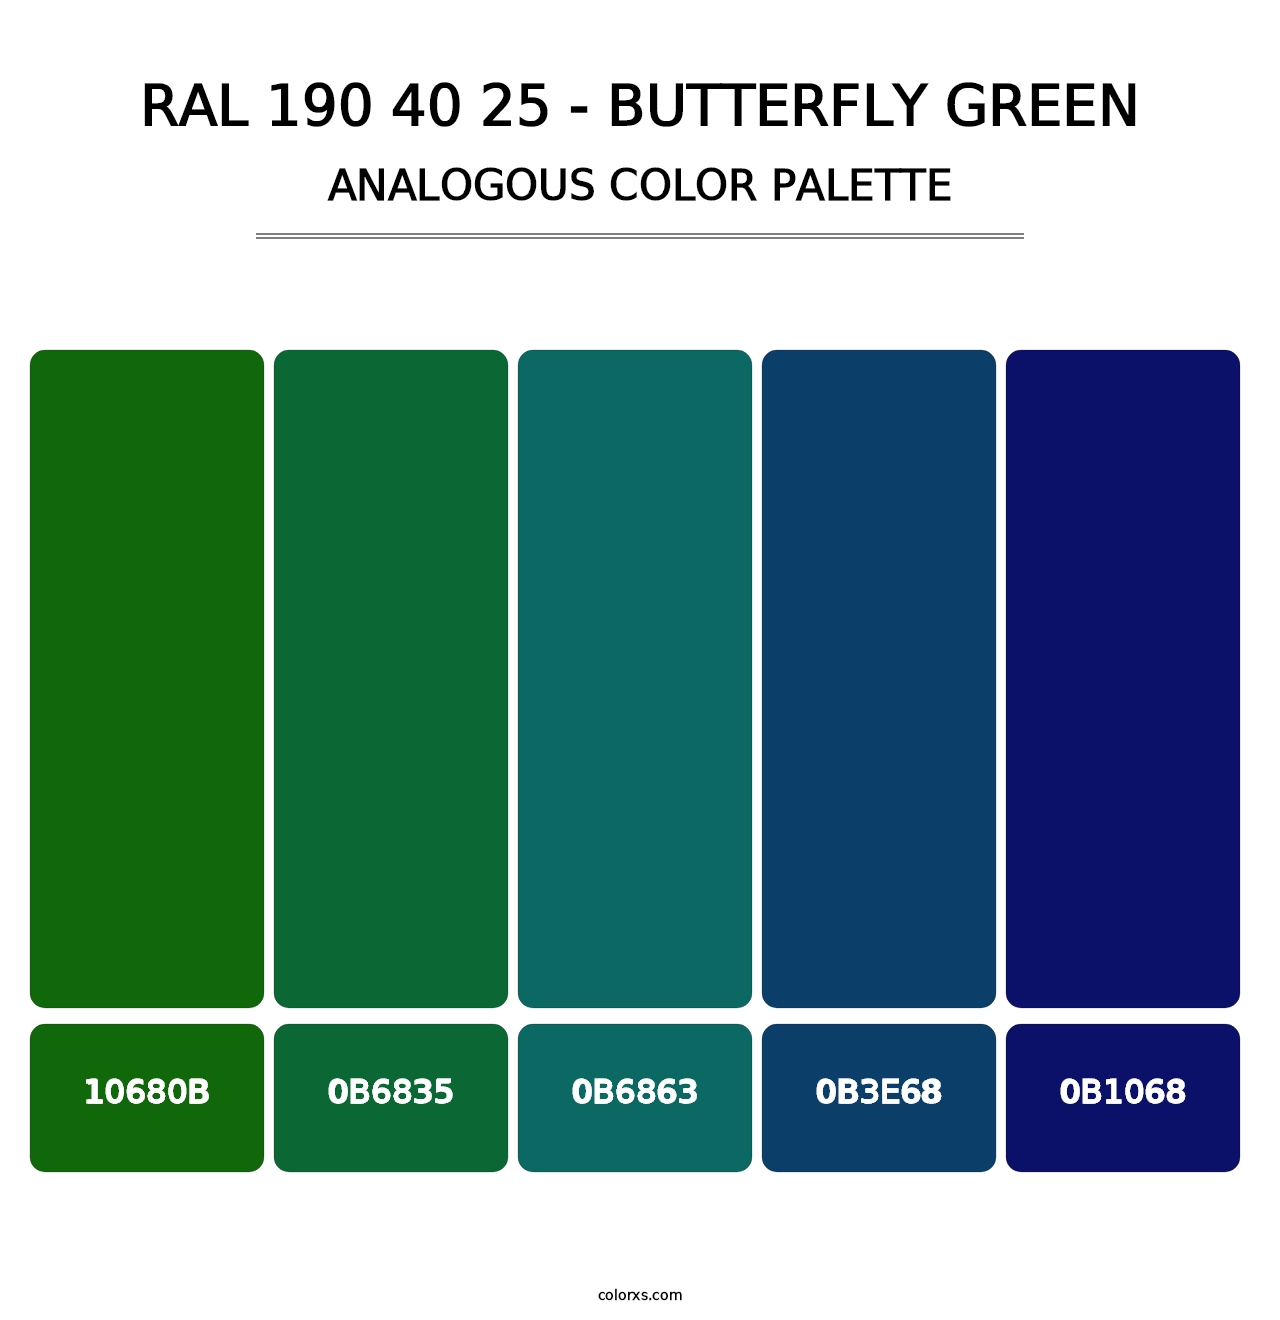 RAL 190 40 25 - Butterfly Green - Analogous Color Palette